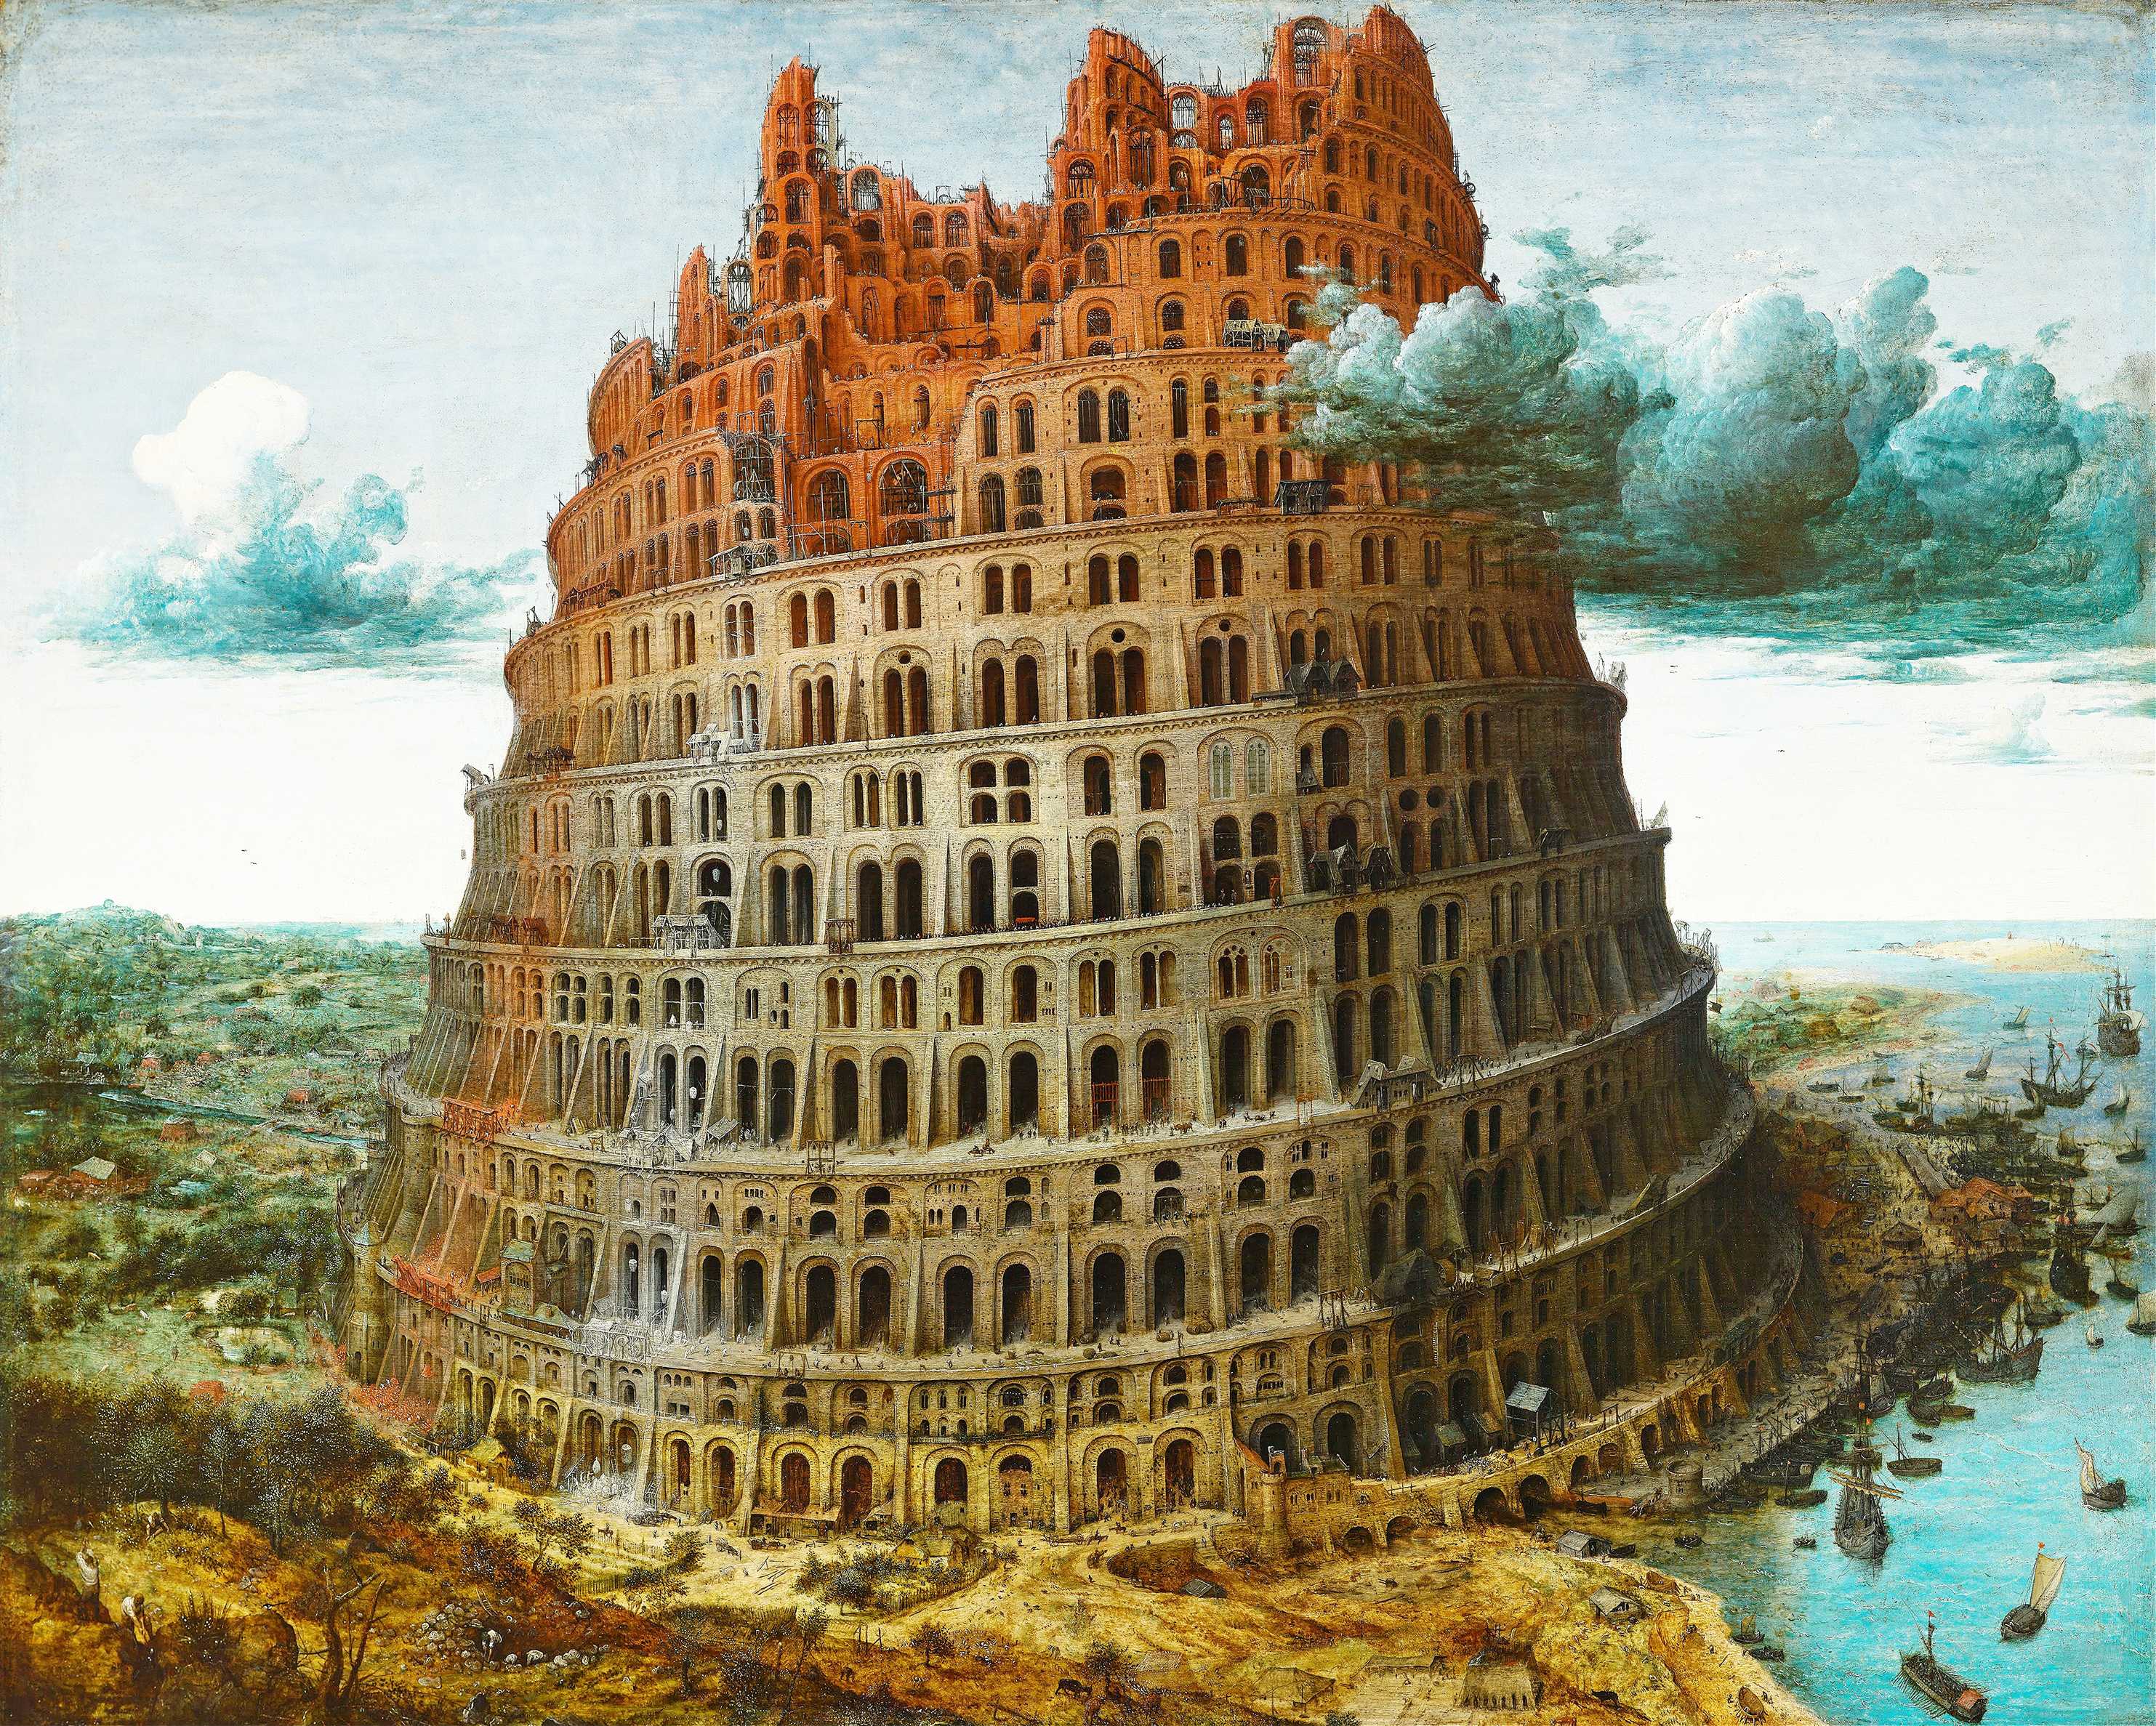 Find out more about Pieter Bruegel The Elder - The (little) Tower Of Babel